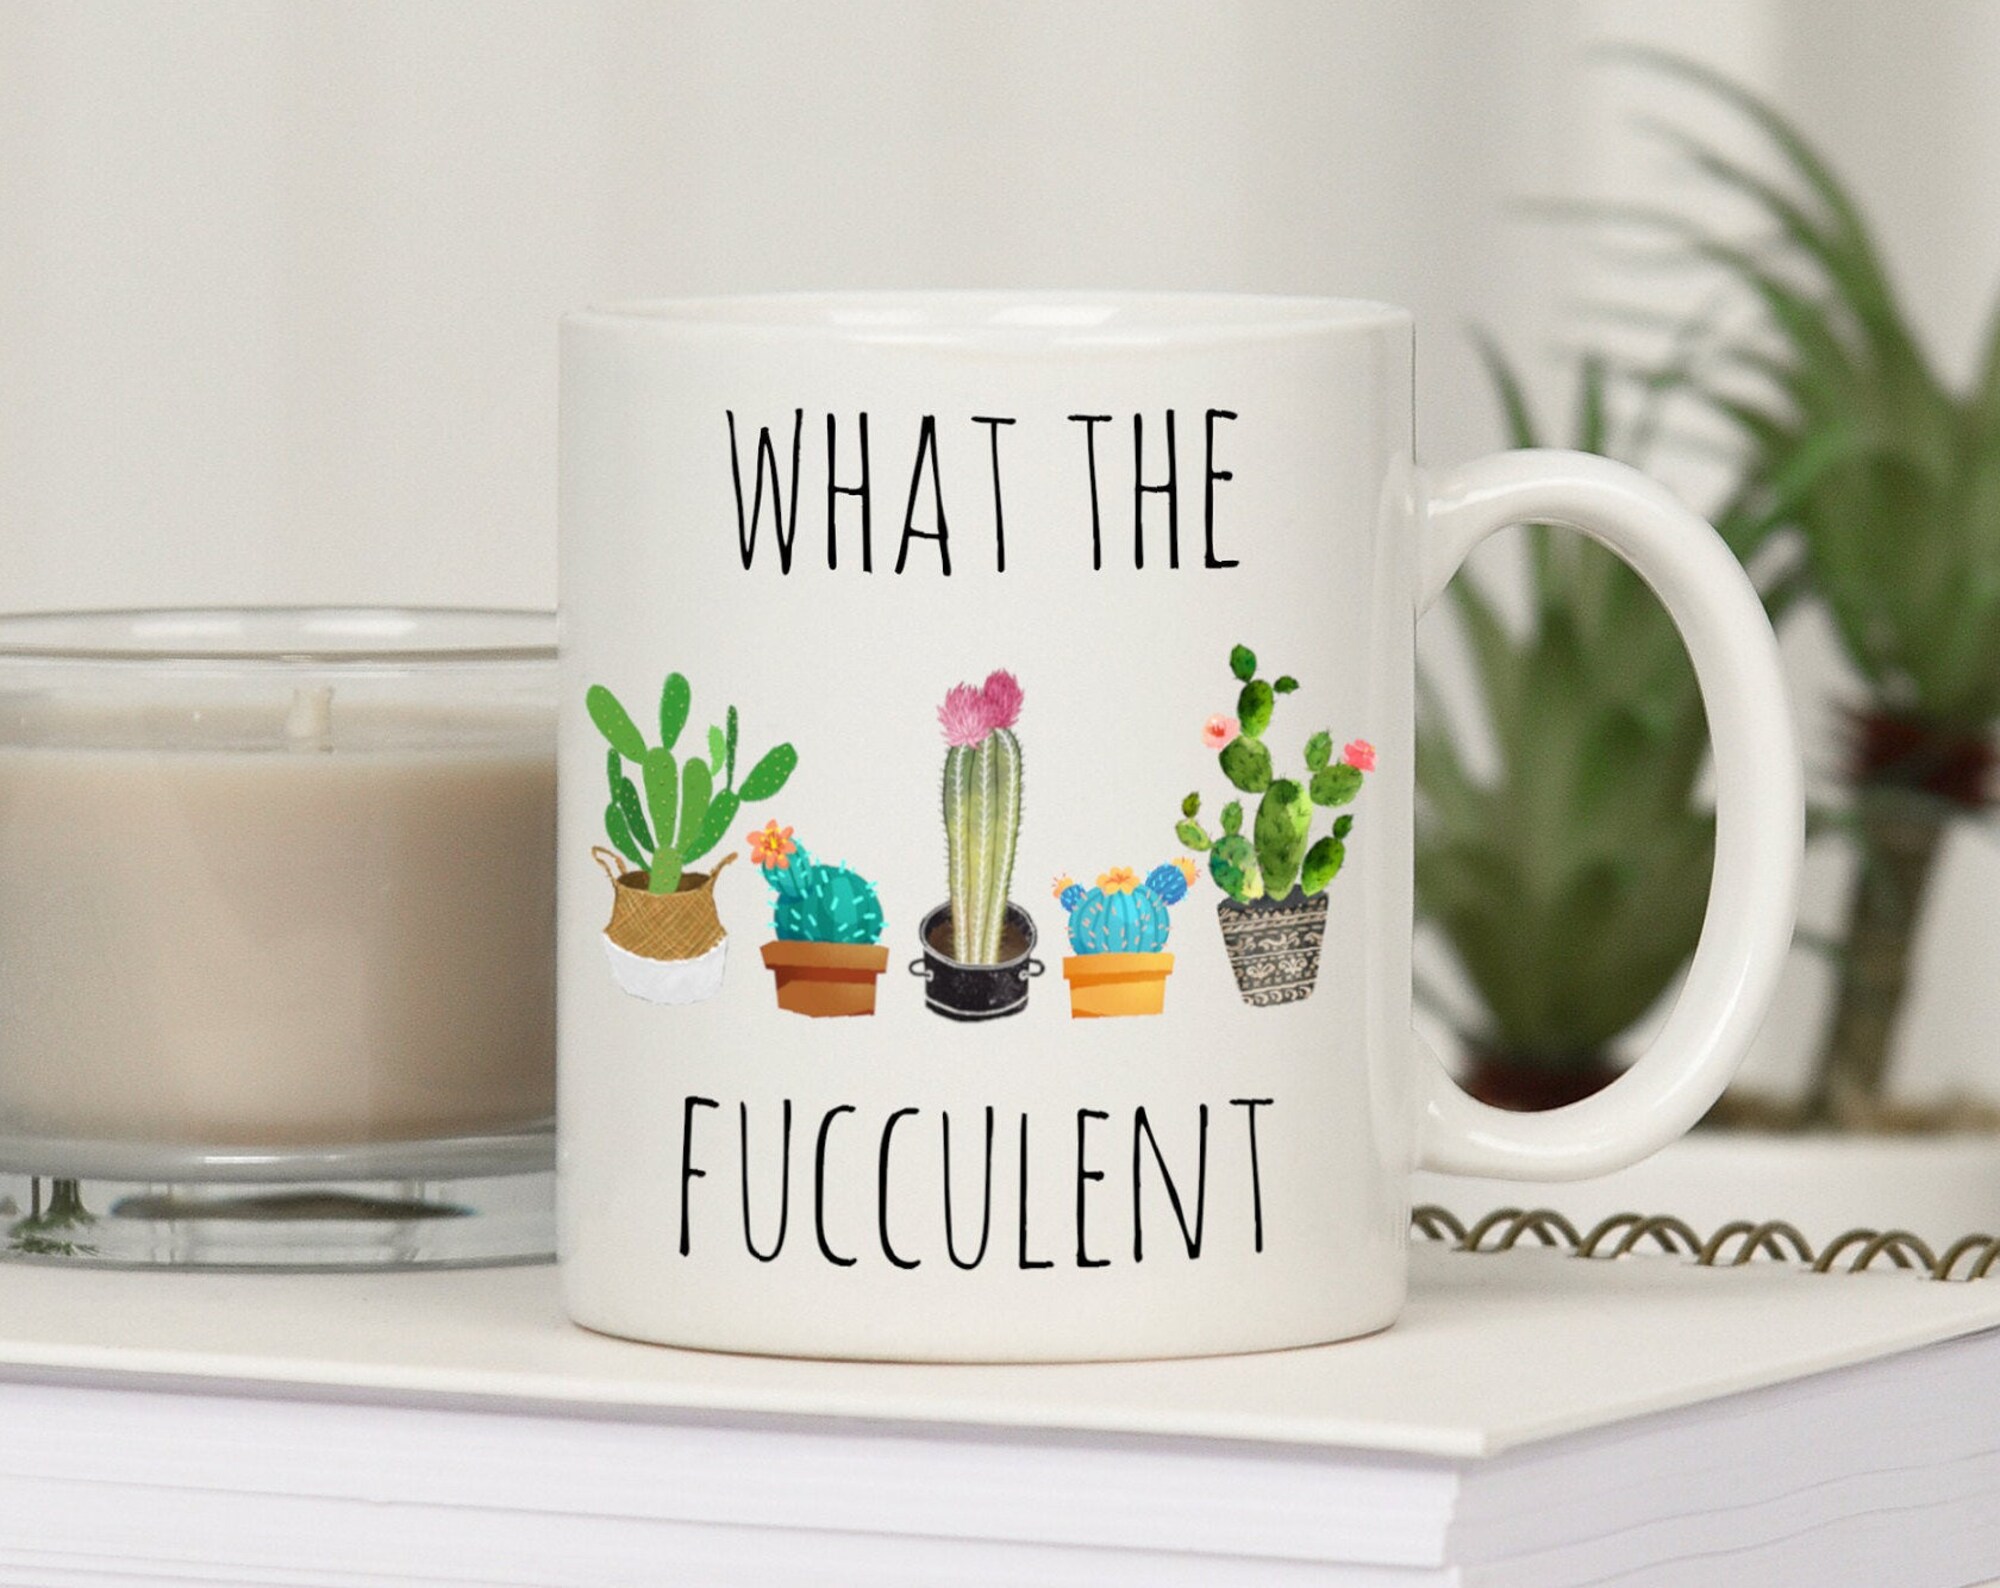 Discover What the Fucculent Mug